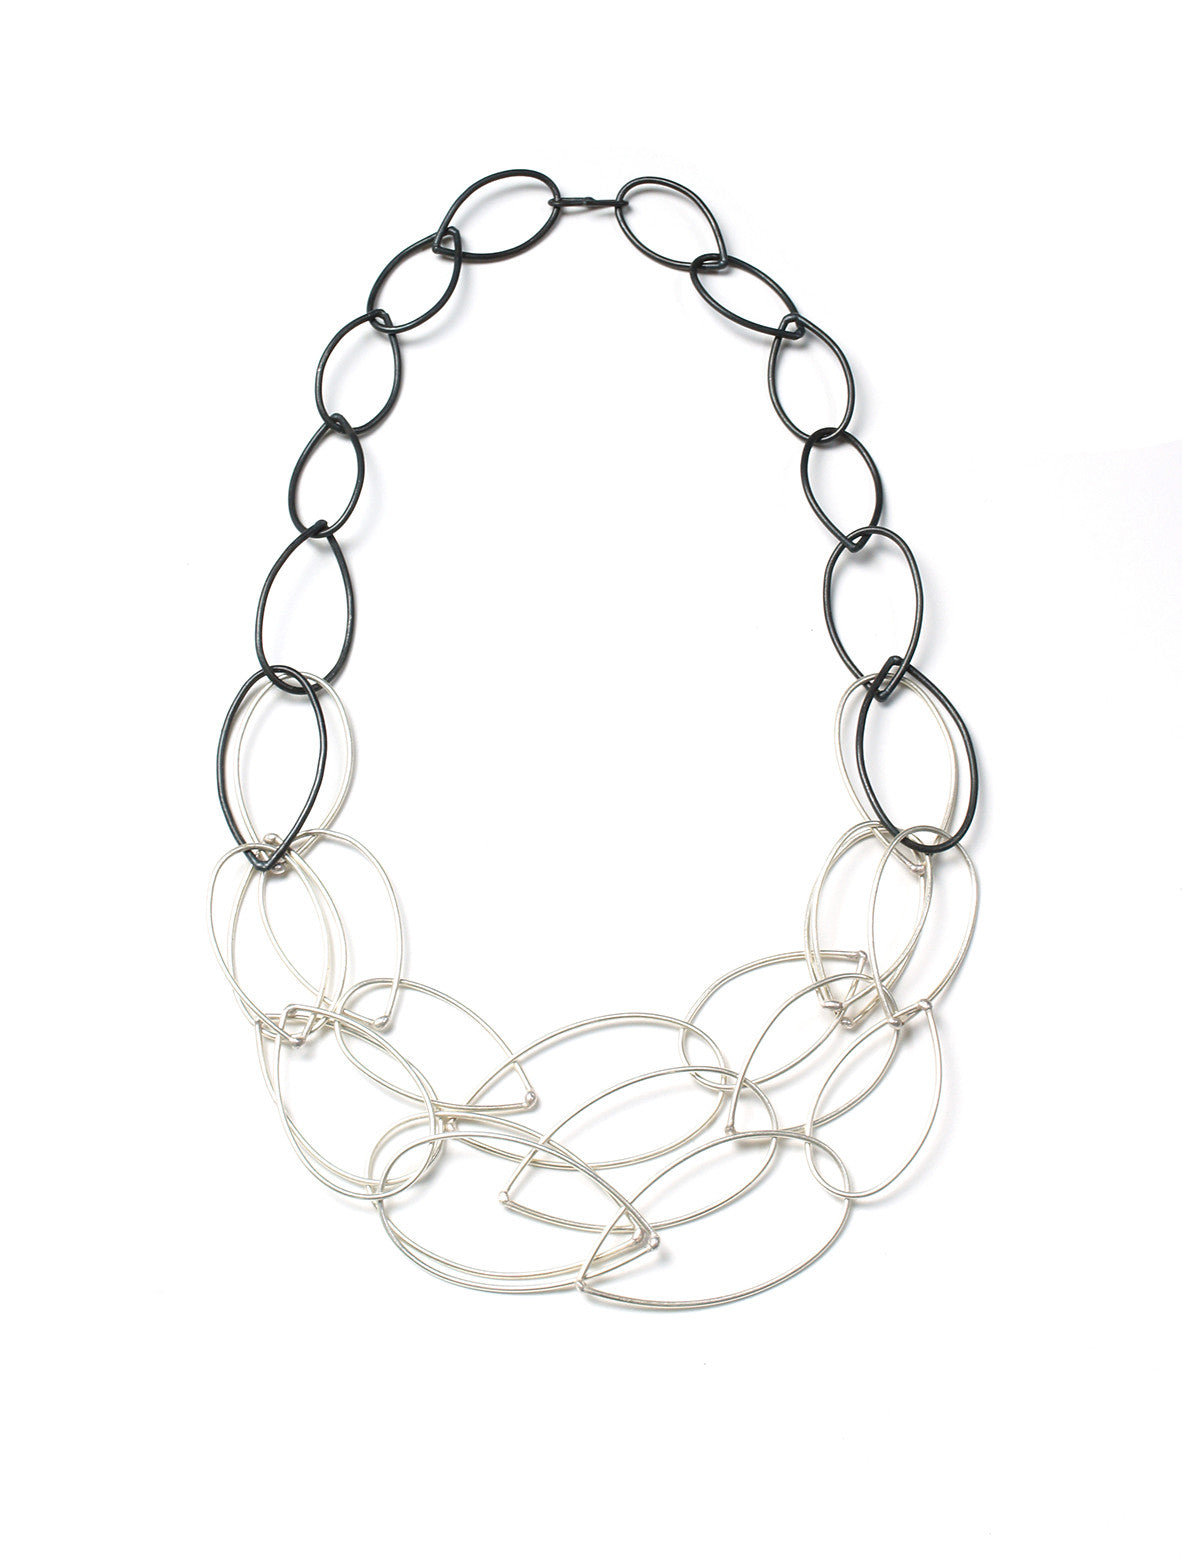 Emma necklace - shift collection